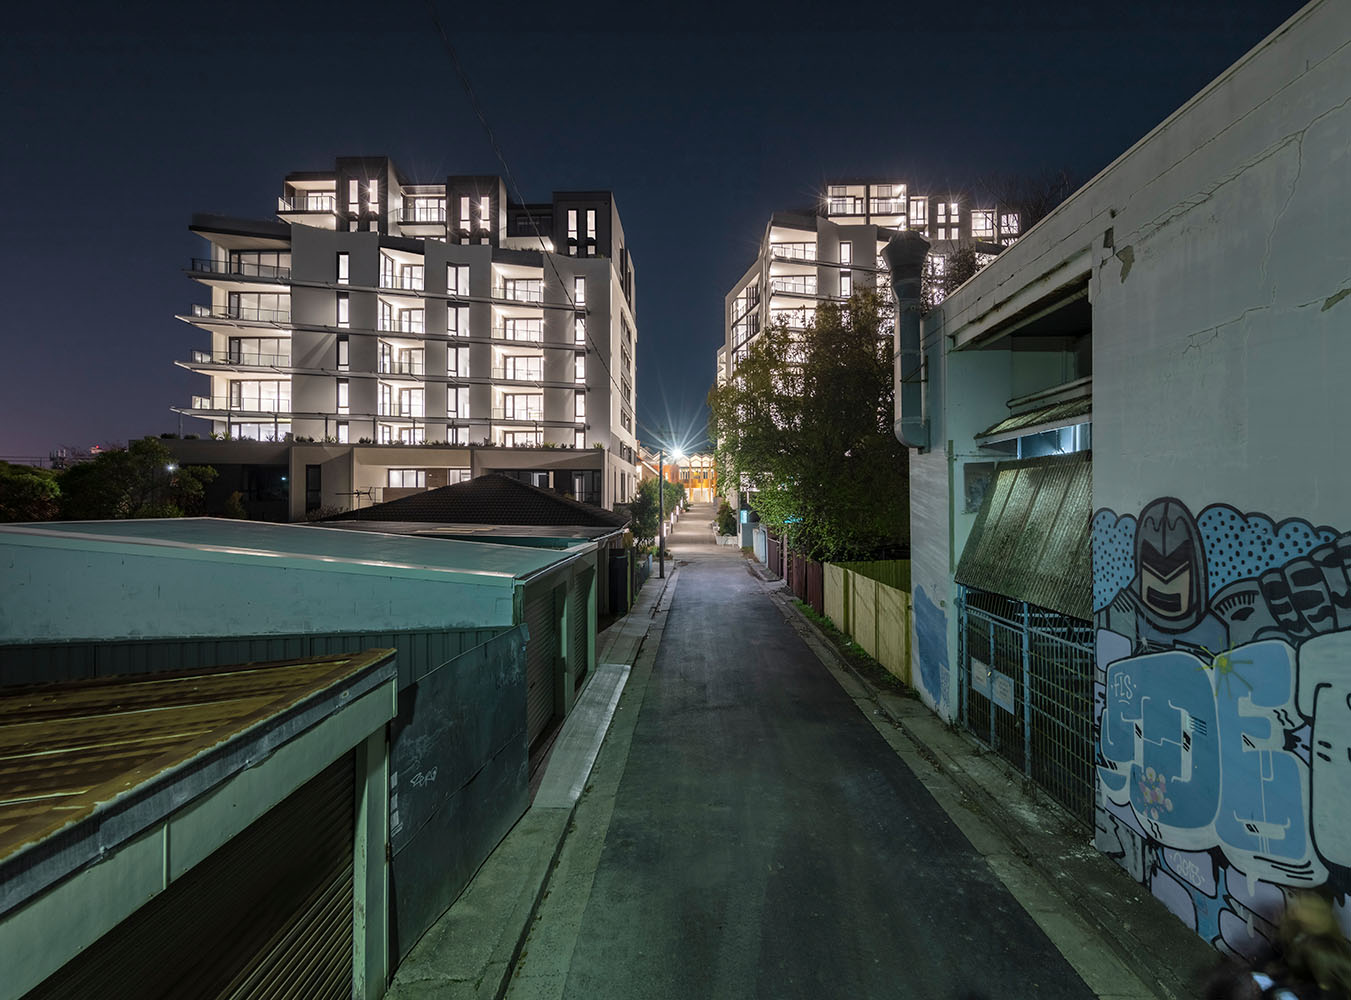 mirvac_marrickville_murray_fredericks_architectural_photography